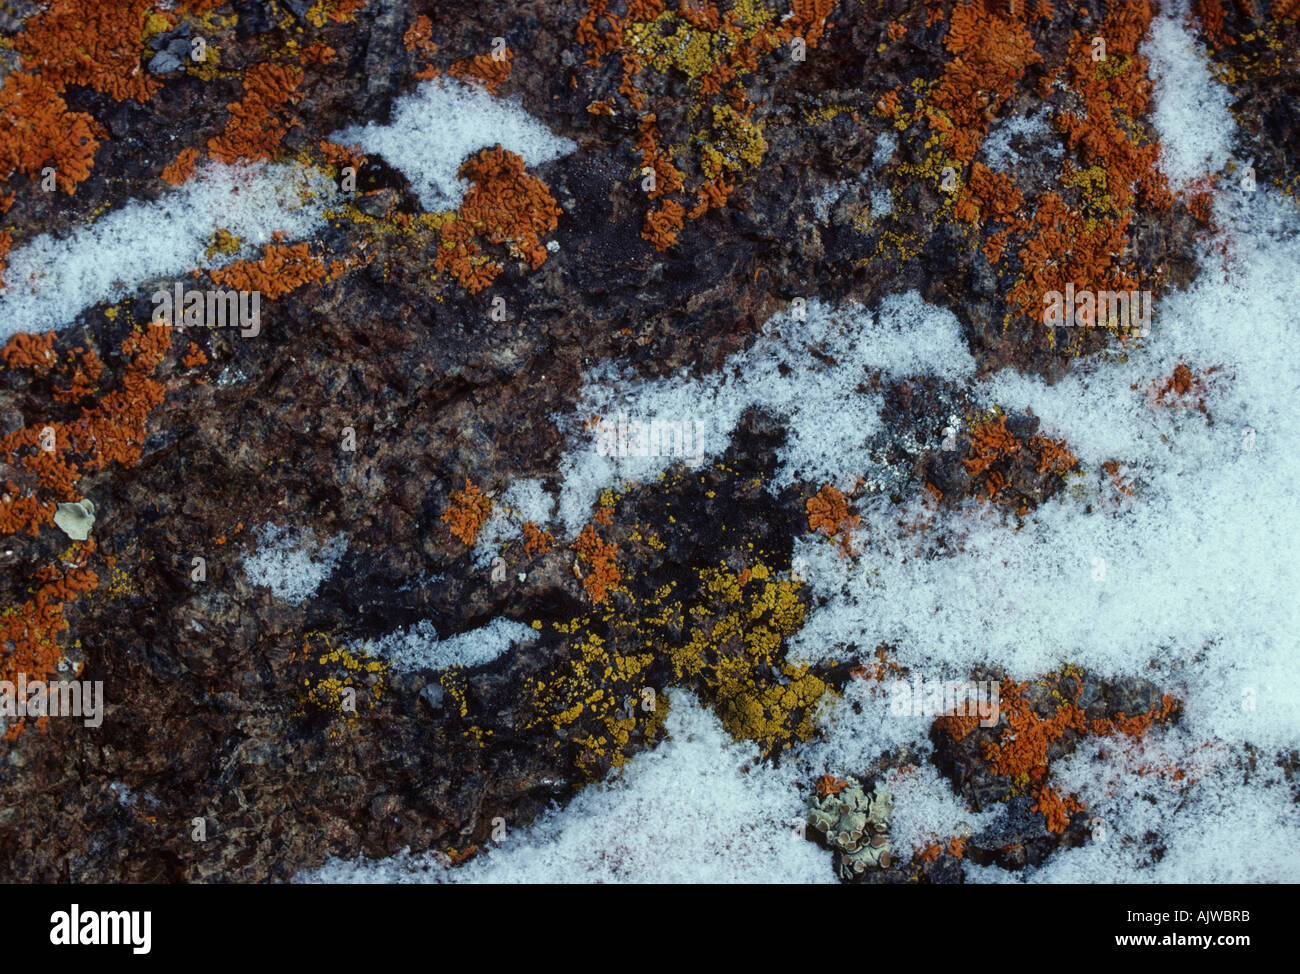 Colorful colourful crustose lichens and snow on a rock. Stock Photo